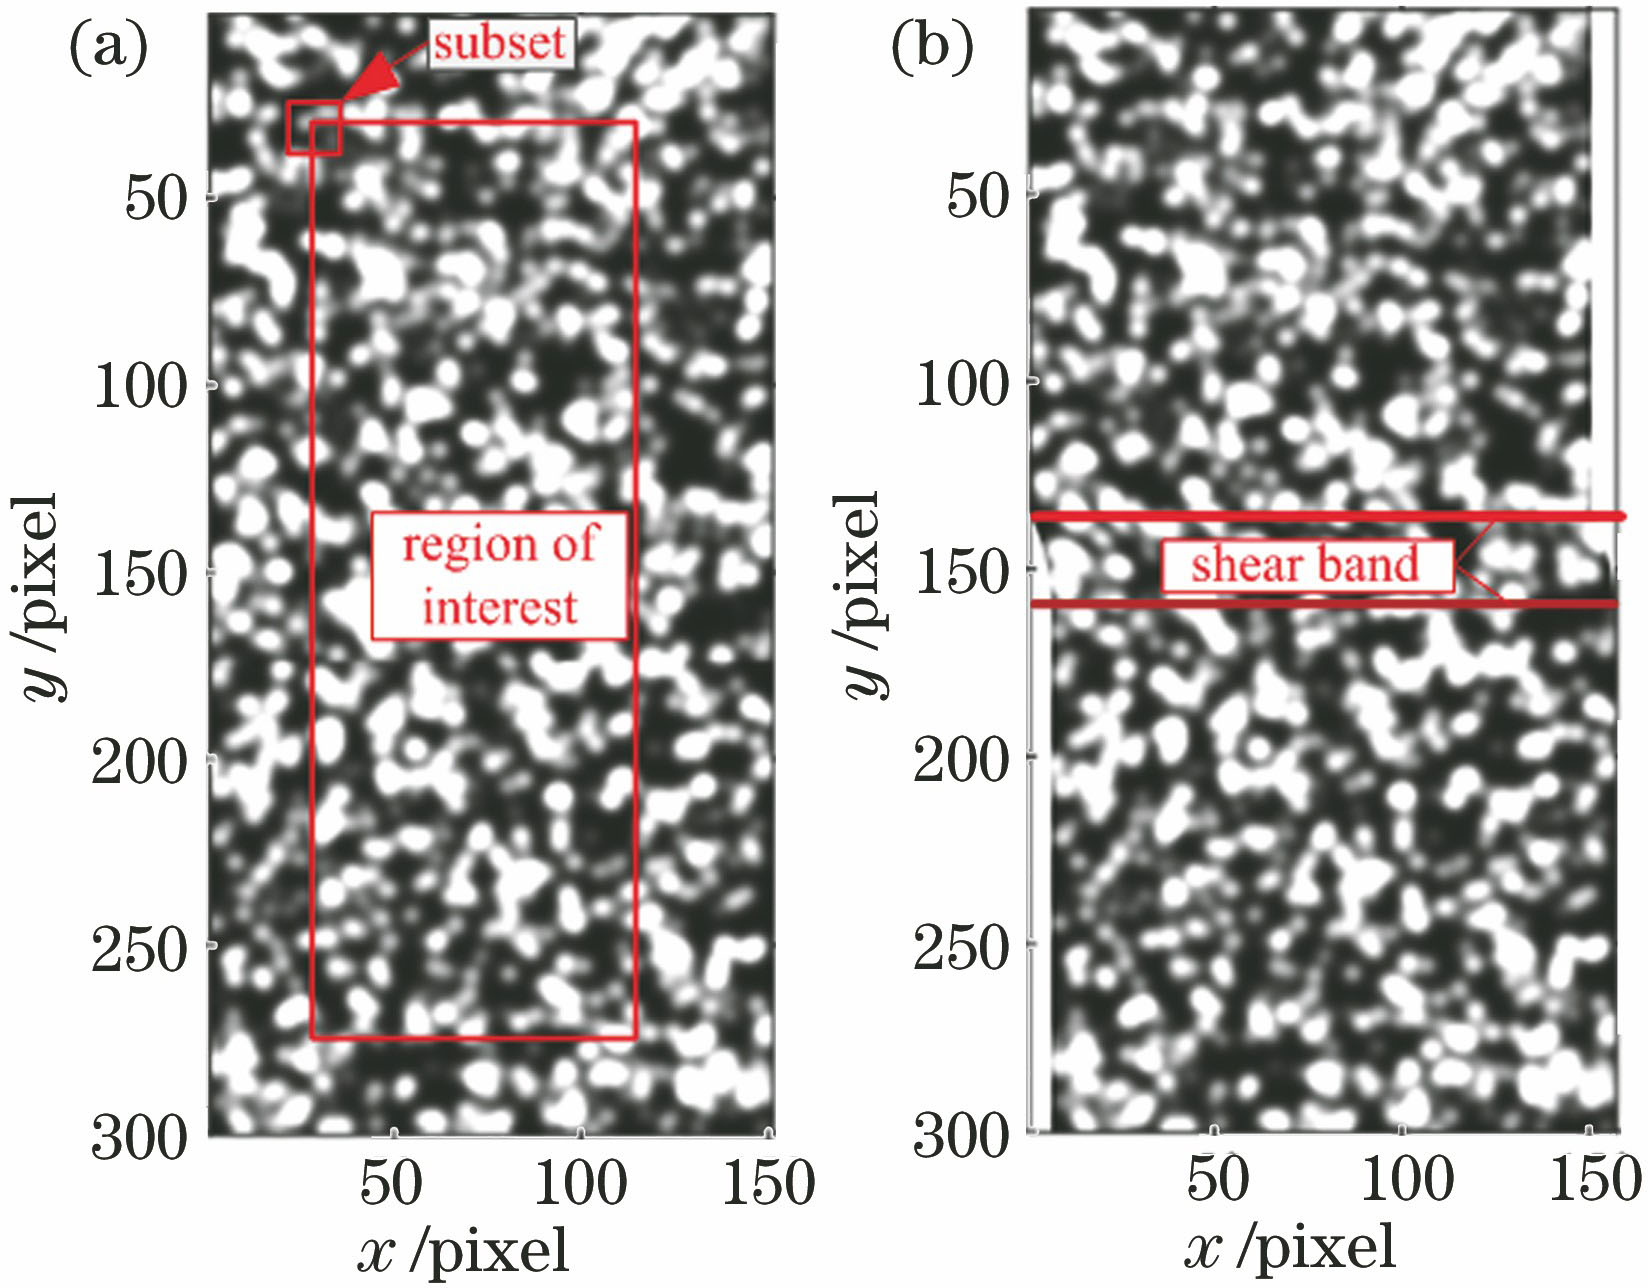 Simulated speckle images. (a) Reference image;(b) shear band image with strain gradient